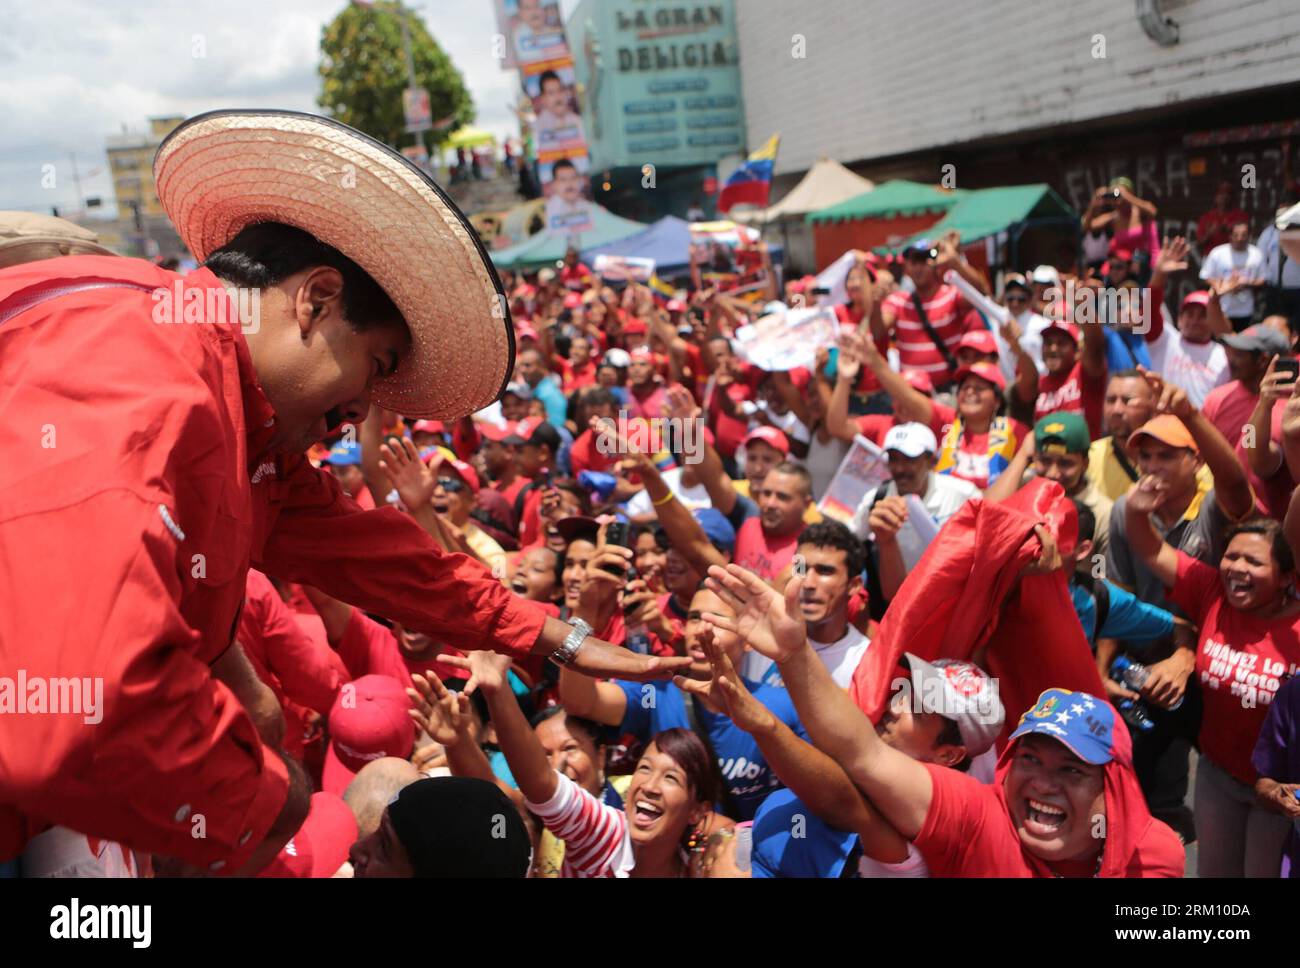 Bildnummer: 59486115  Datum: 08.04.2013  Copyright: imago/Xinhua MATURIN, April, 2013 - Image provided by Hugo Chavez Campaign Command shows Venezuelan Acting President and presidential candidate Nicolas Maduro (L) attending a campaign in Maturin, Monagas State, Venezuela, on April 8, 2013. Venezuela will held presidential elections on April 14. (Xinhua/Hugo Chavez Campaign Command) (da) VENEZUELA-POLITICS-ELECTIONS PUBLICATIONxNOTxINxCHN People Politik xcb x0x 2013 quer premiumd     59486115 Date 08 04 2013 Copyright Imago XINHUA Maturin April 2013 Image provided by Hugo Chavez Campaign Comma Stock Photo